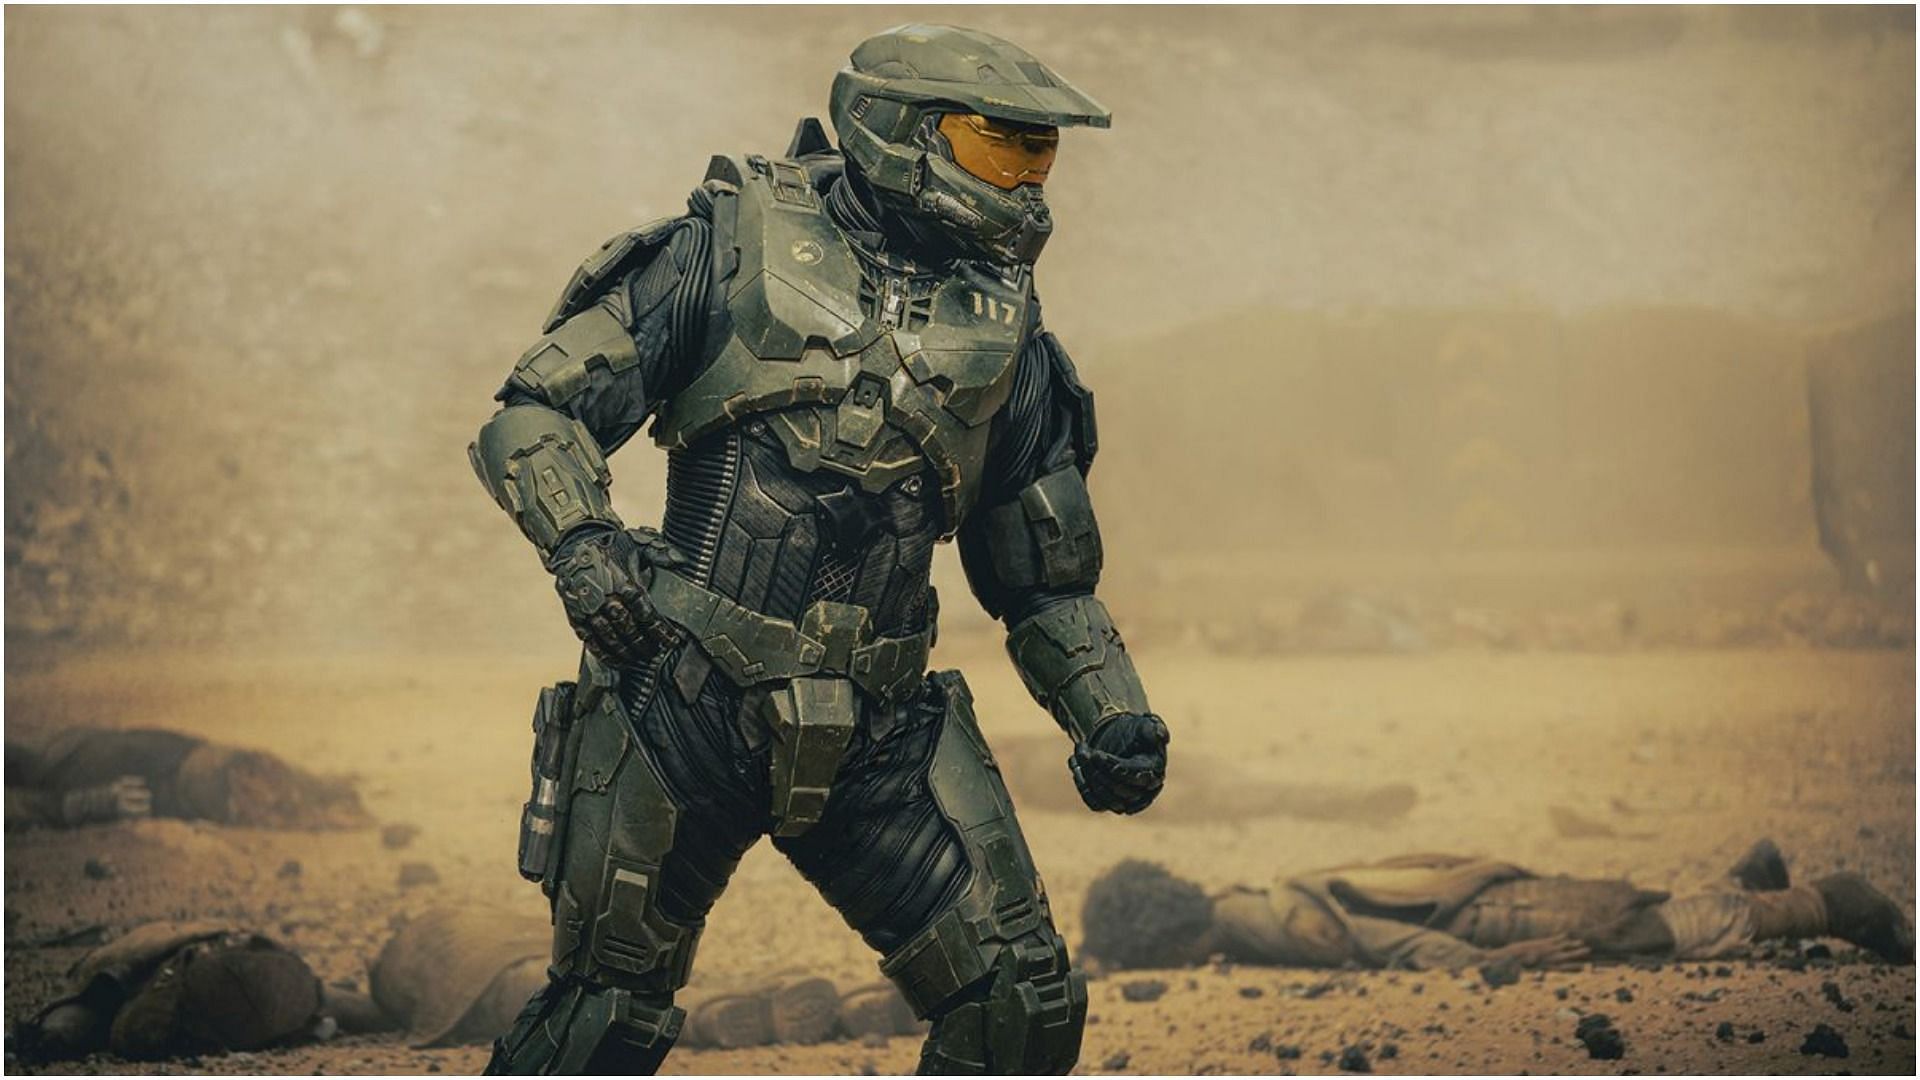 Halo TV Series To Completely Change Master Chief's Character